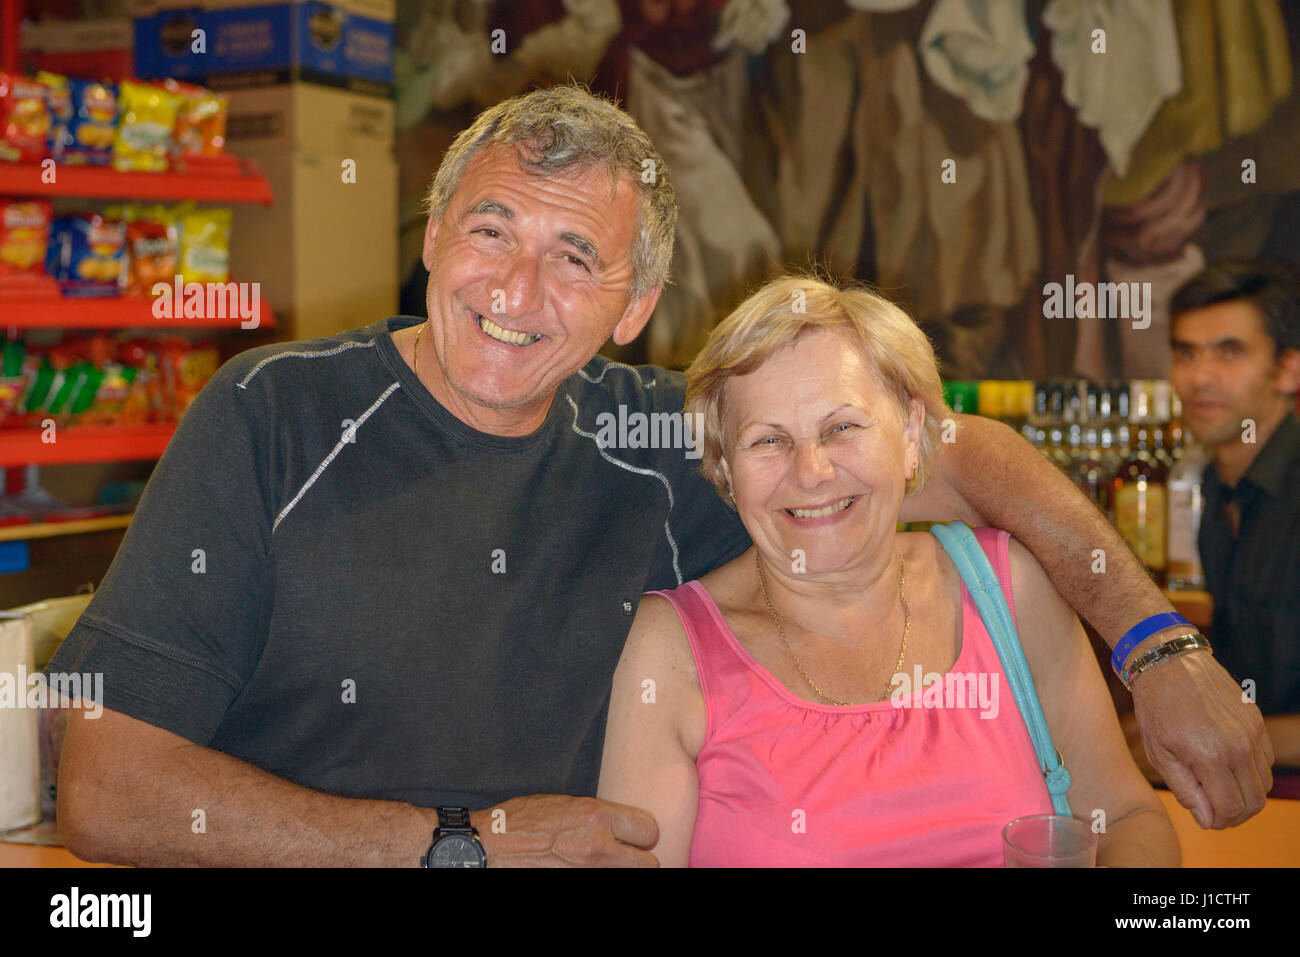 Smiling aged man is embracing the laughing elderly woman shoulders in bar. Stock Photo